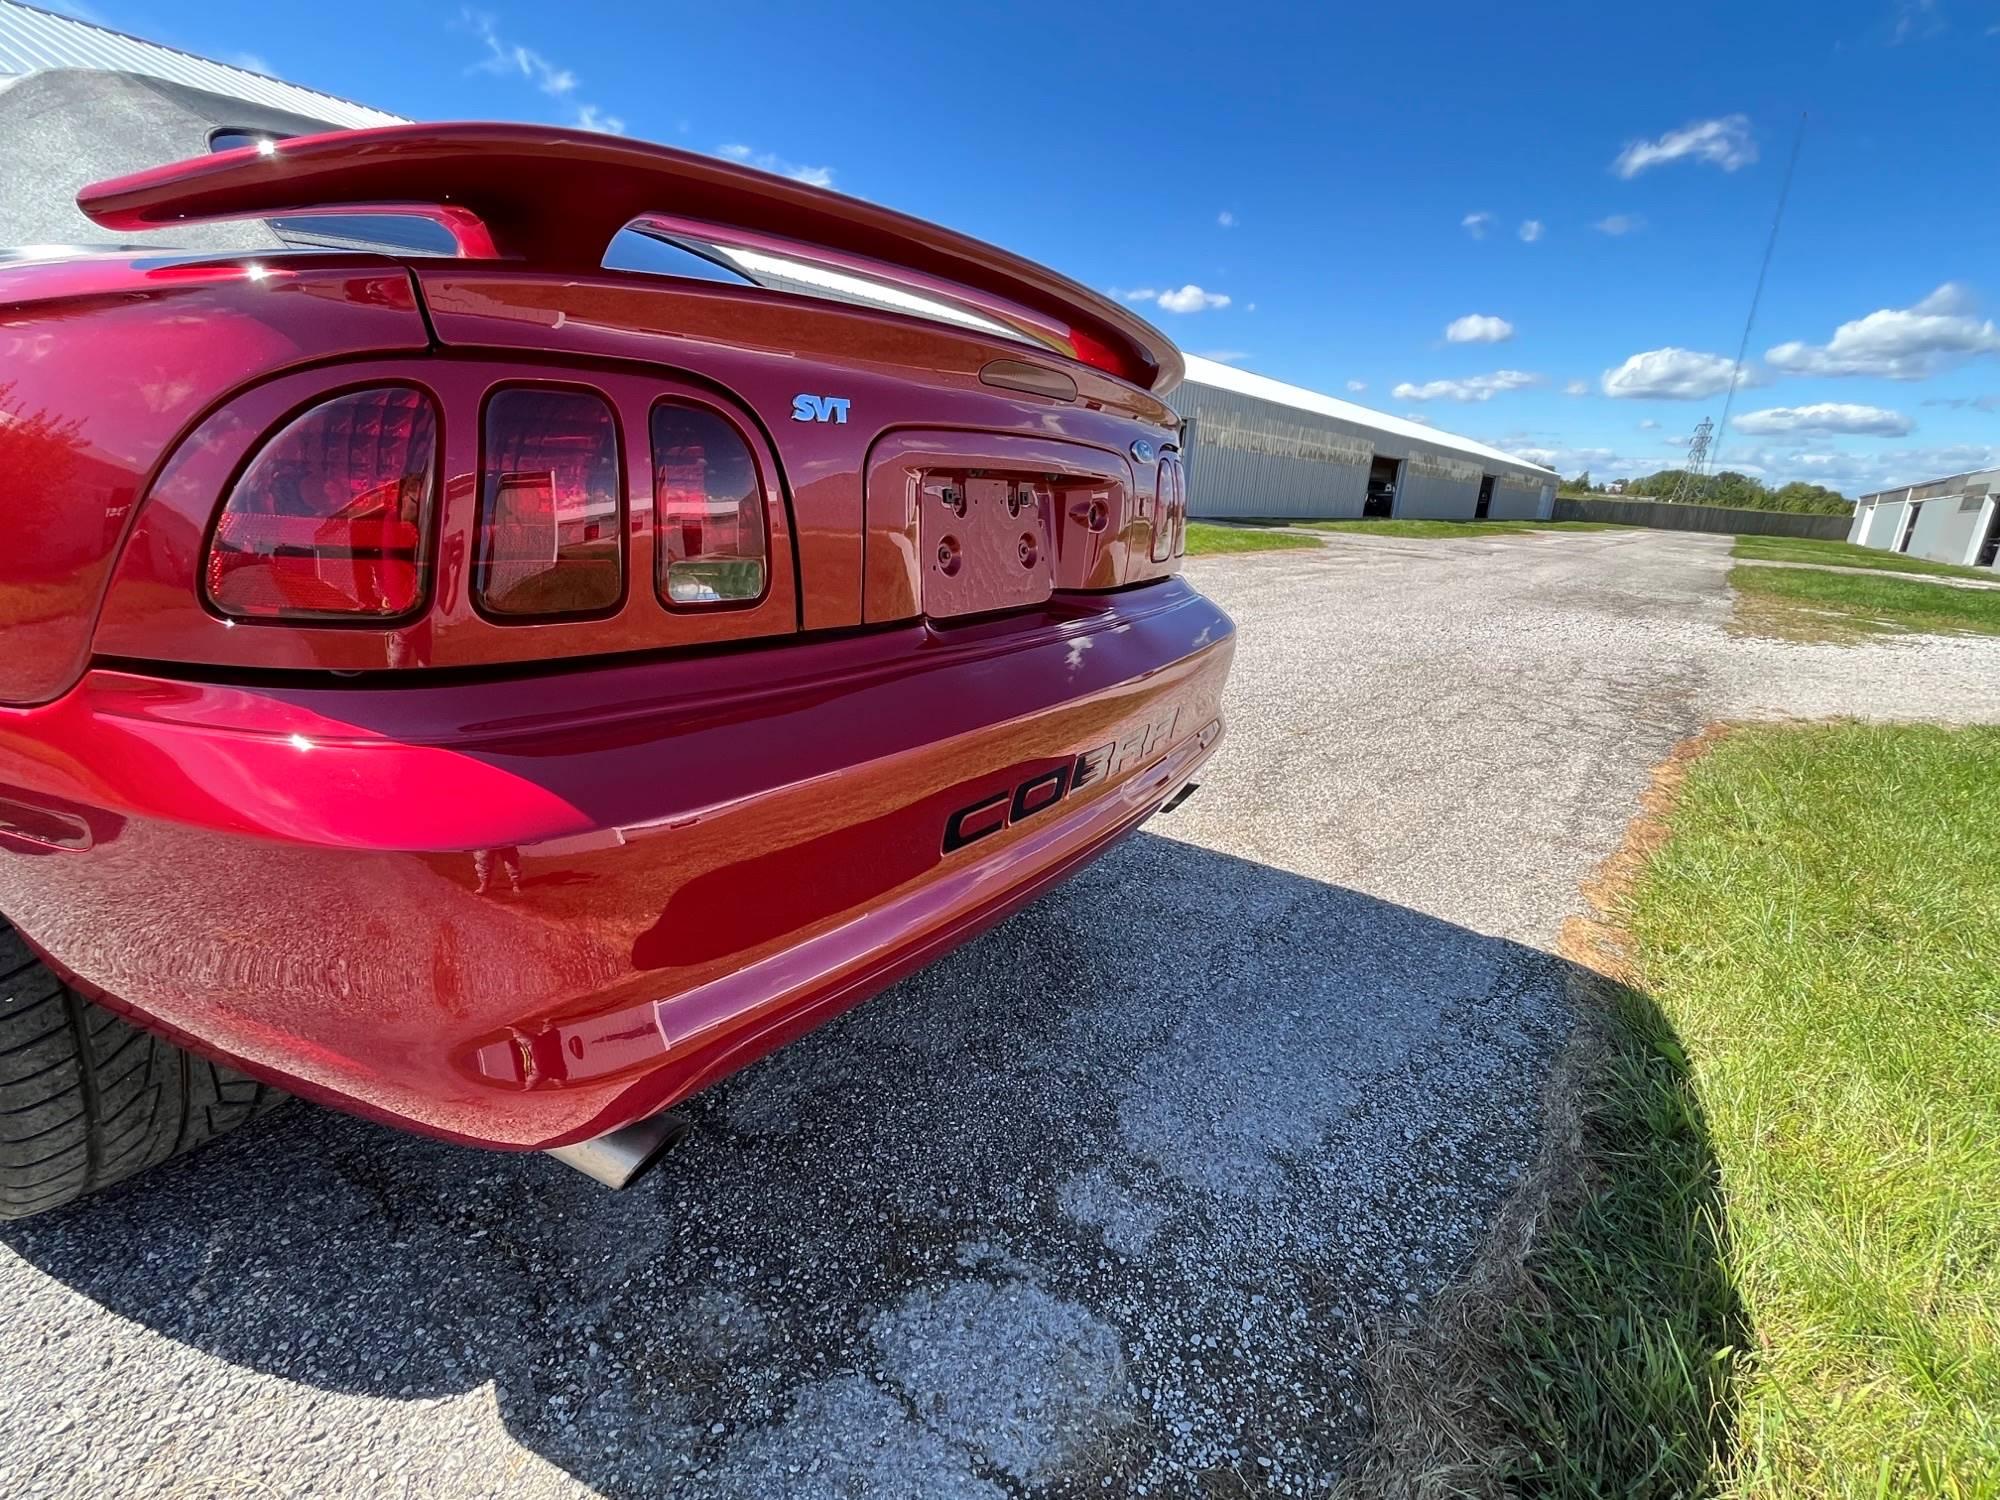 1998 Ford Mustang Cobra SVT Convertible. MARTI REPORT included. This is a v